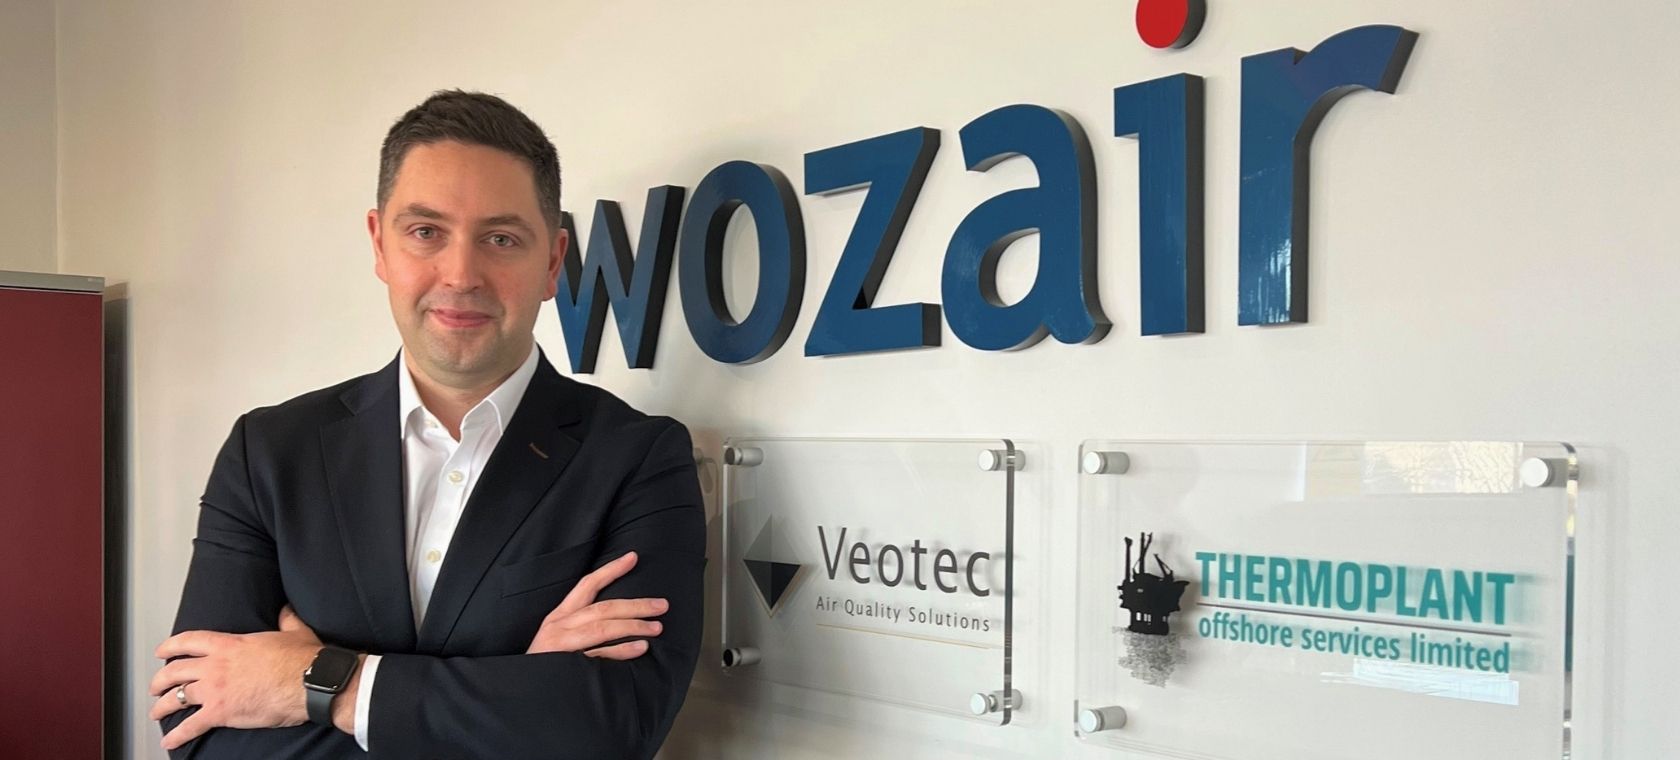 Wozair Appoint New Group Managing Director